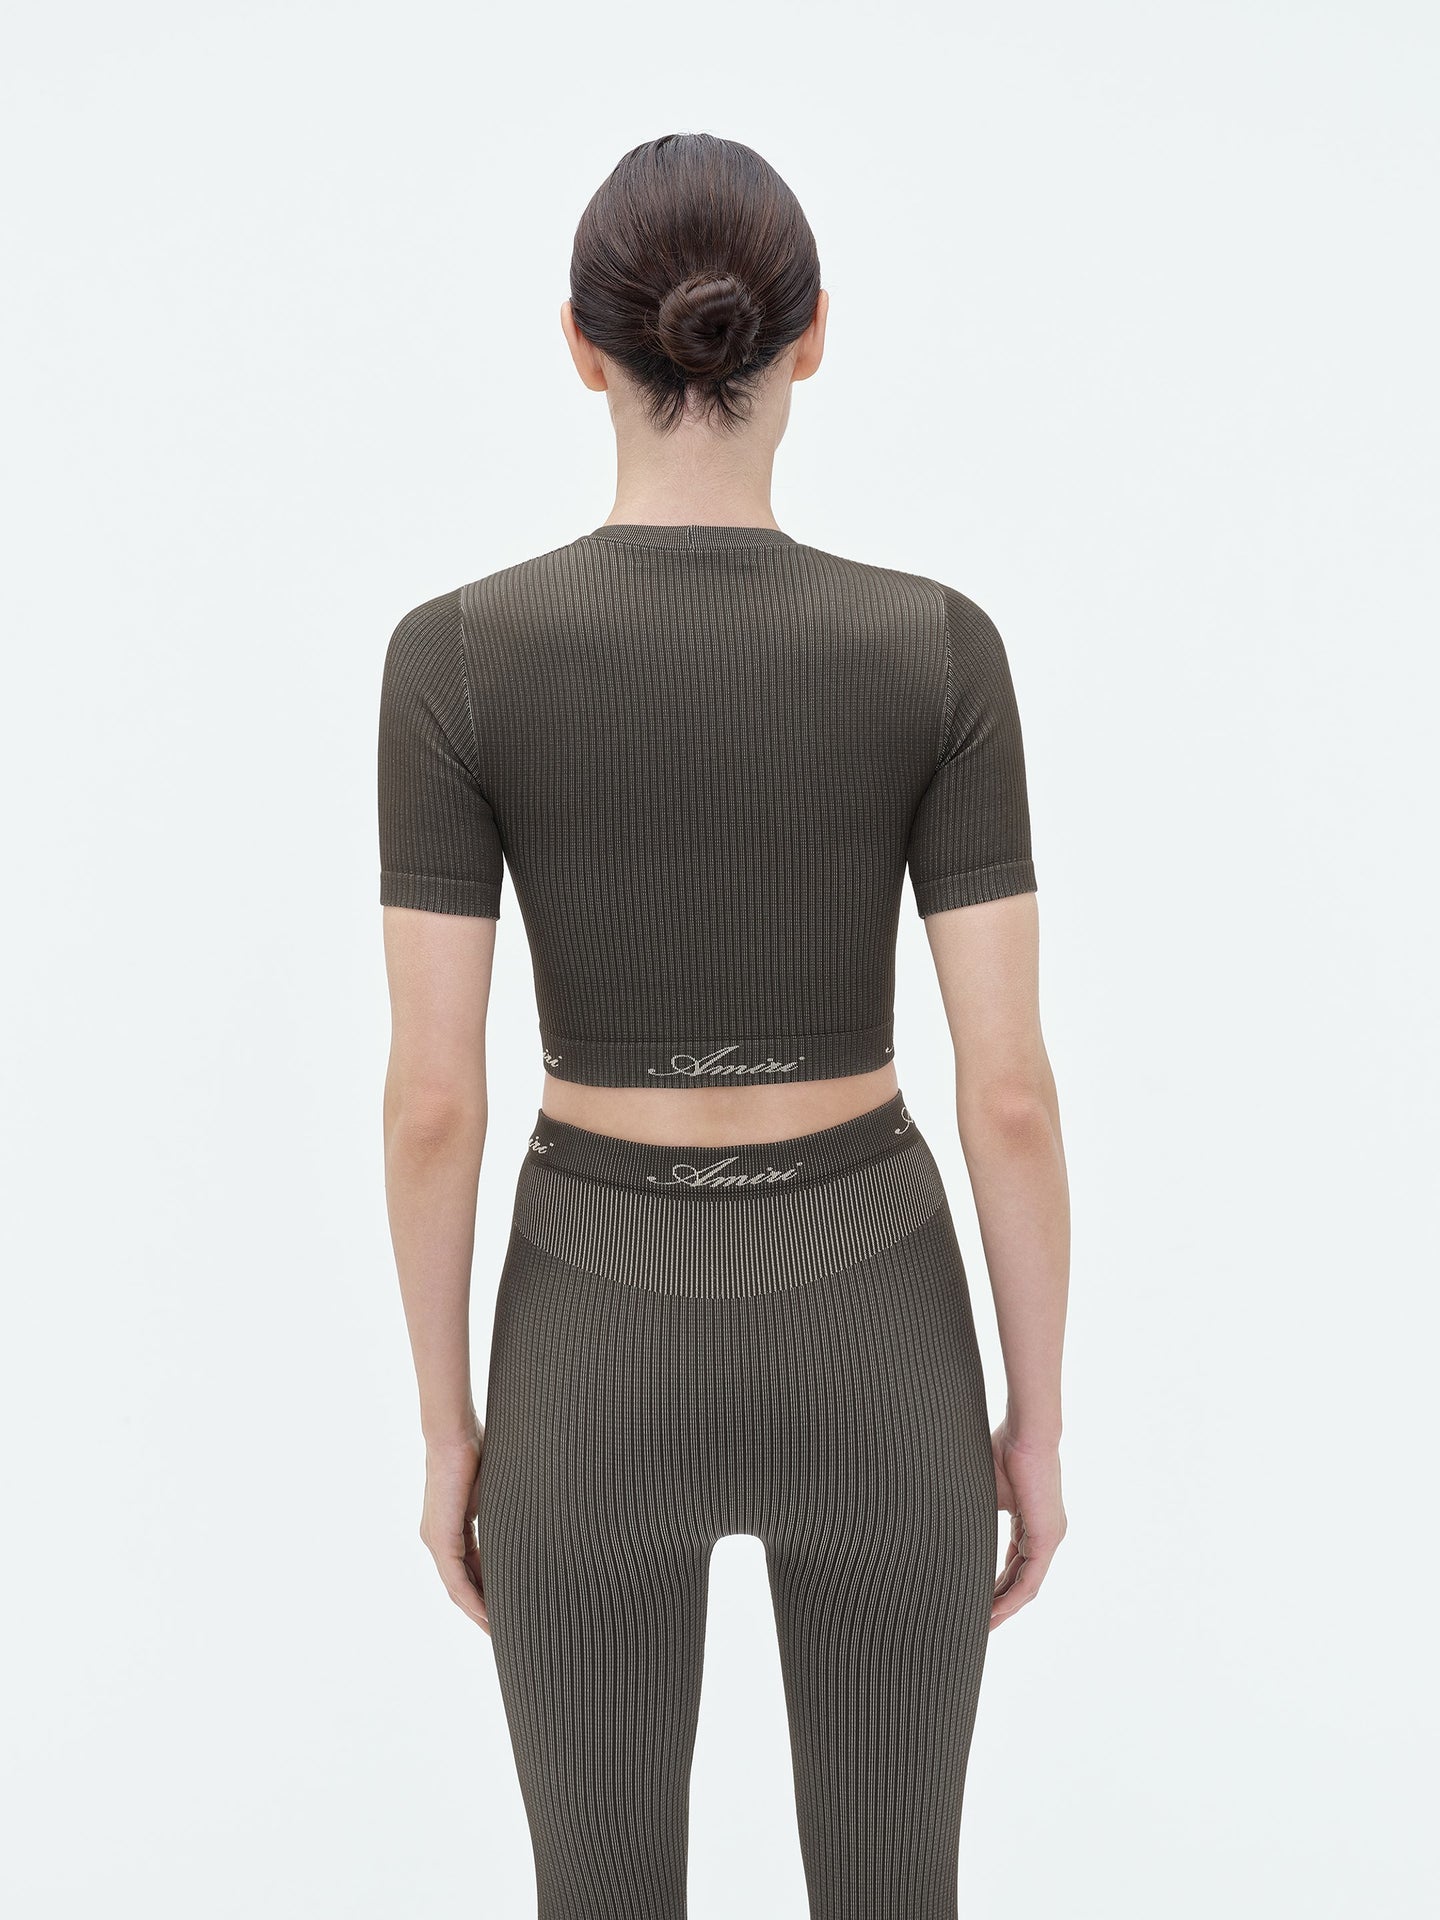 WOMEN - RIBBED SEAMLESS S/S TOP - Brown